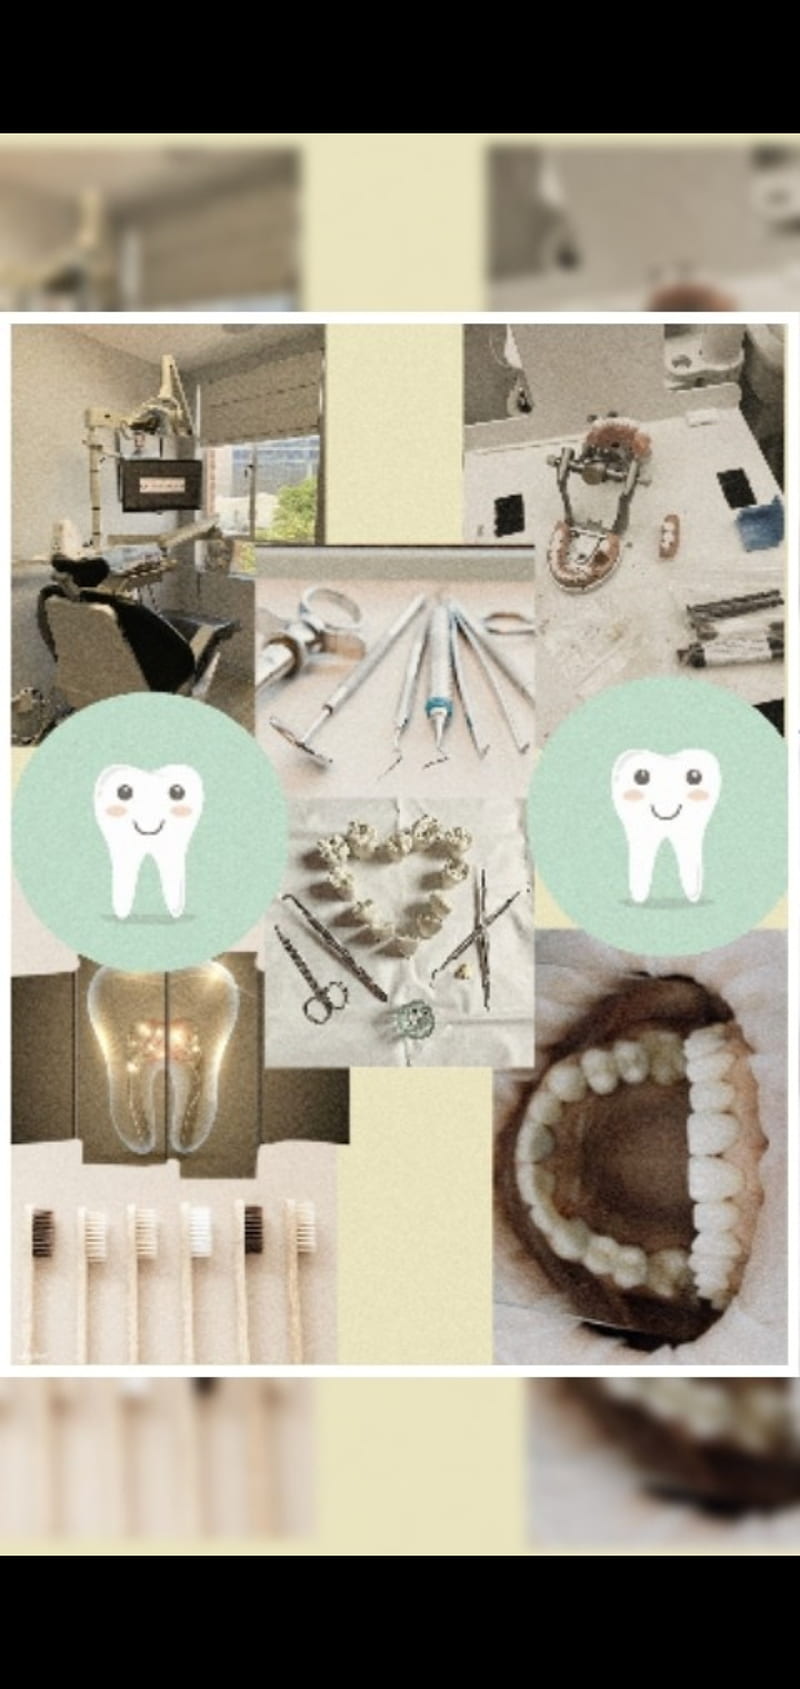 A collage of dental equipment and teeth with a filter applied - Dentist